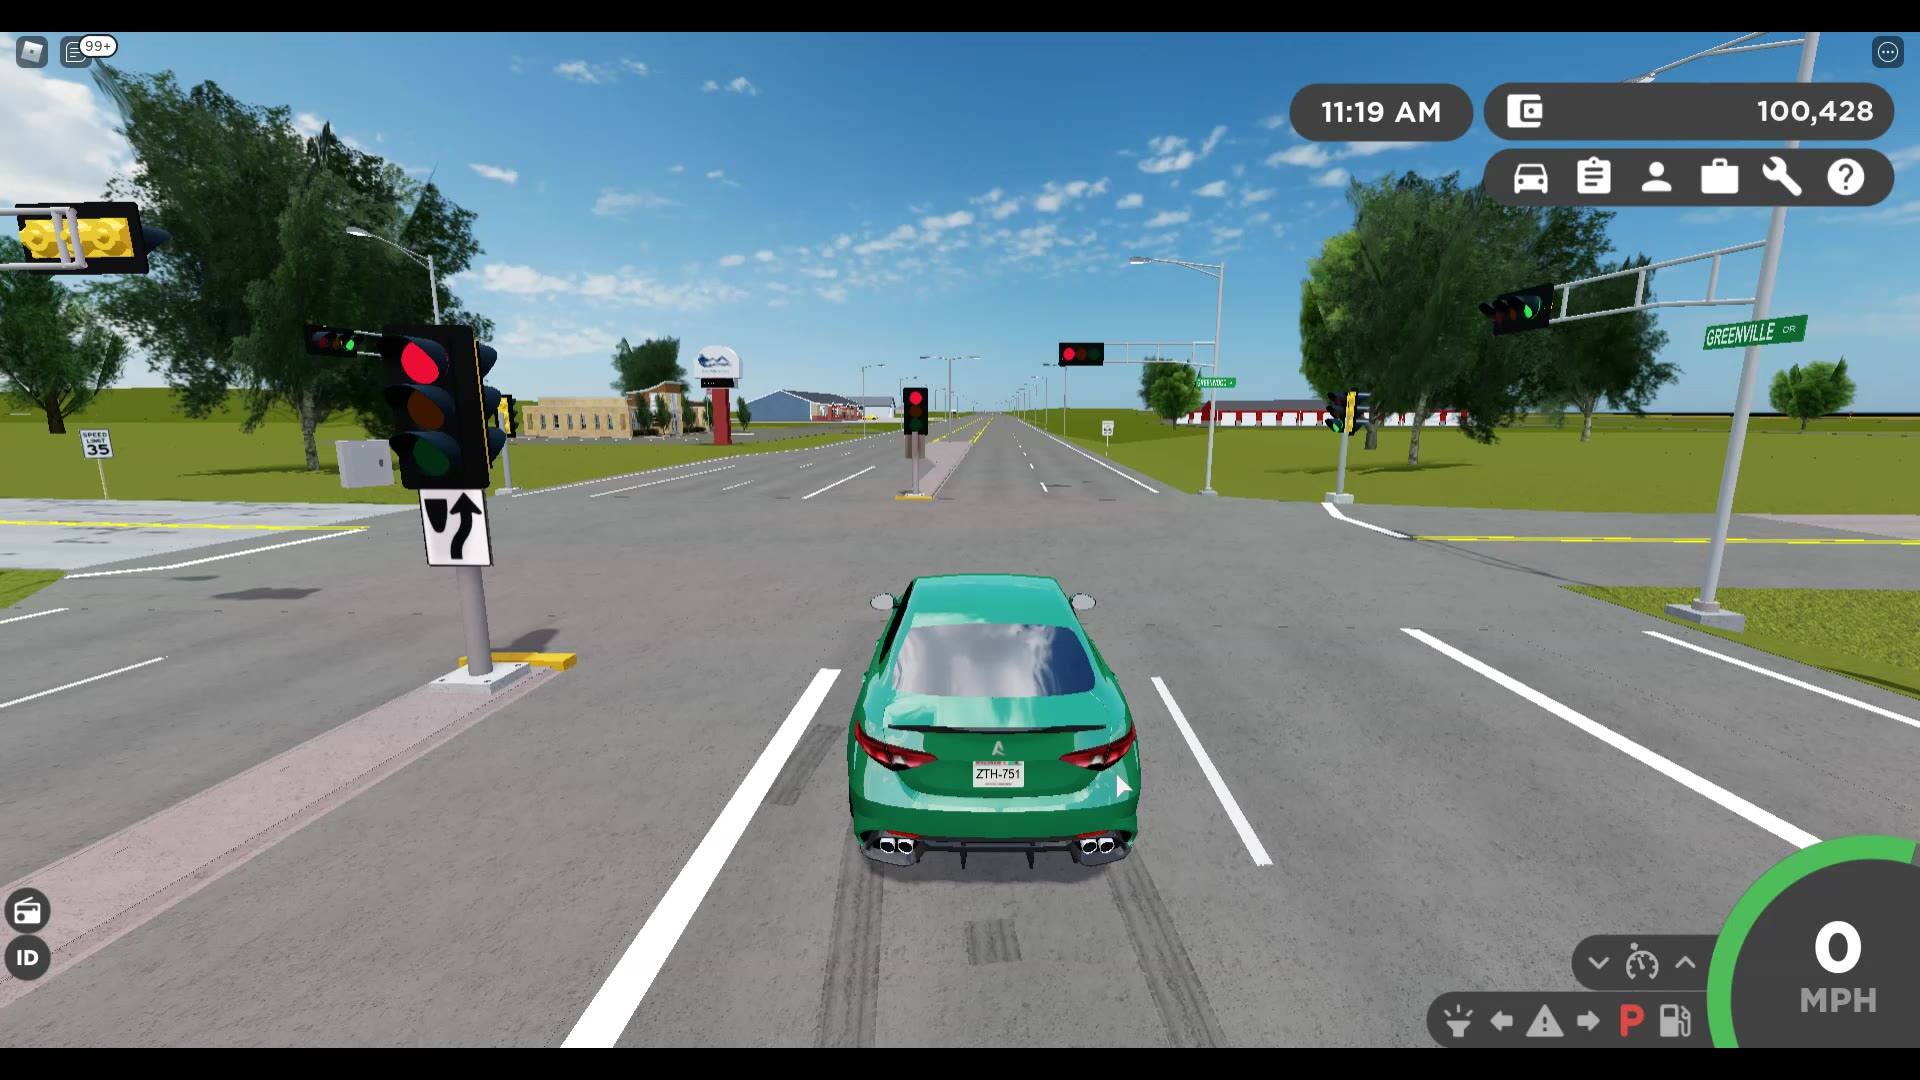 Greenville Hashtag In Roblox Medal Tv - roblox greenville police car controls mobile